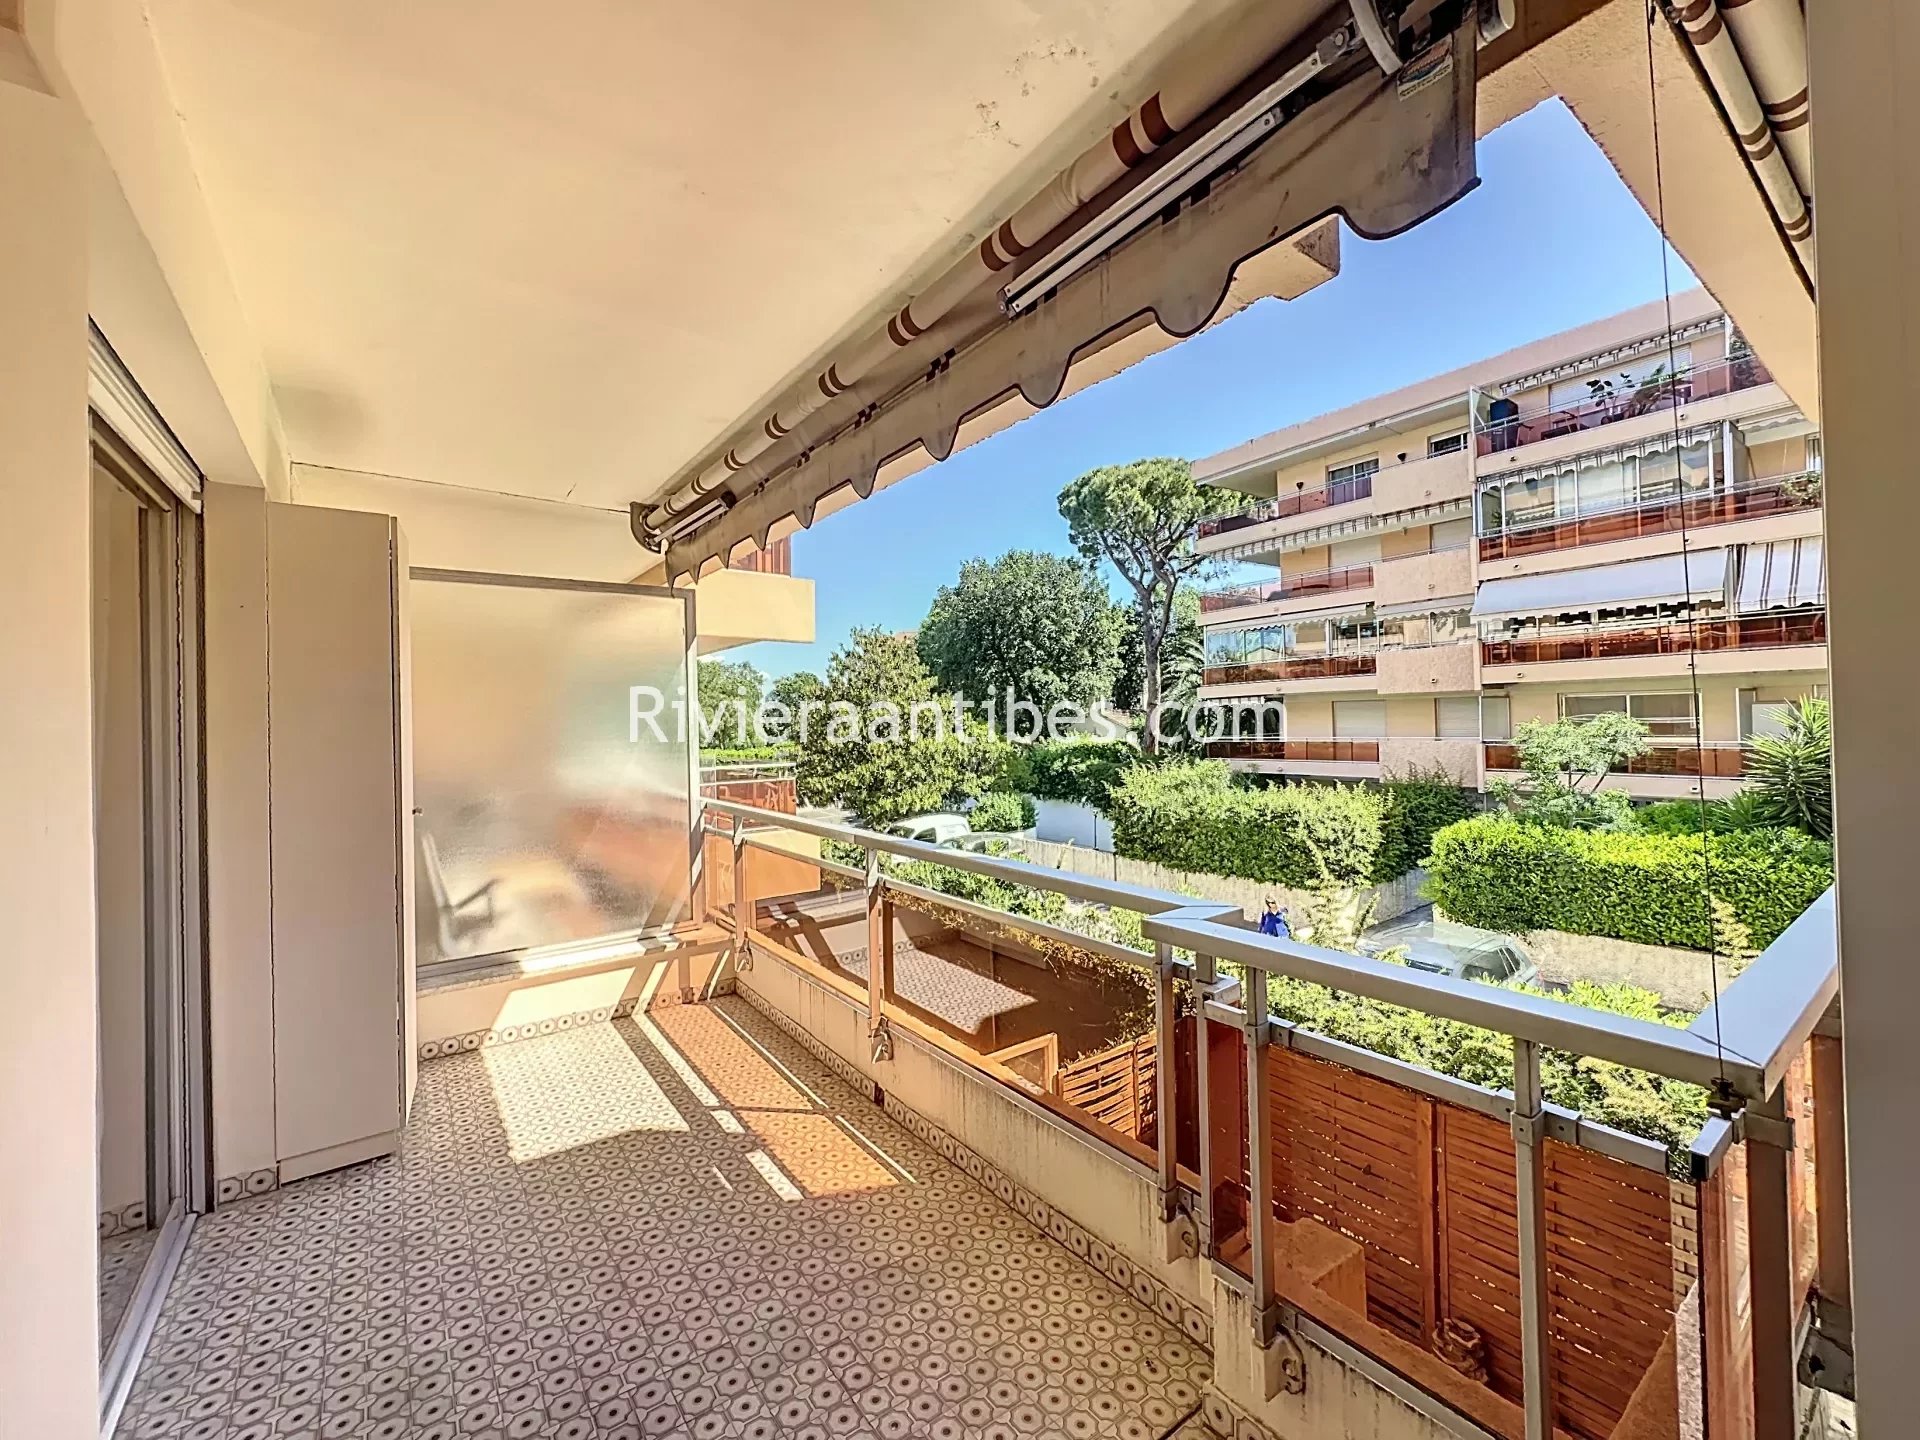 ANTIBES 2P 54sqm on the hill